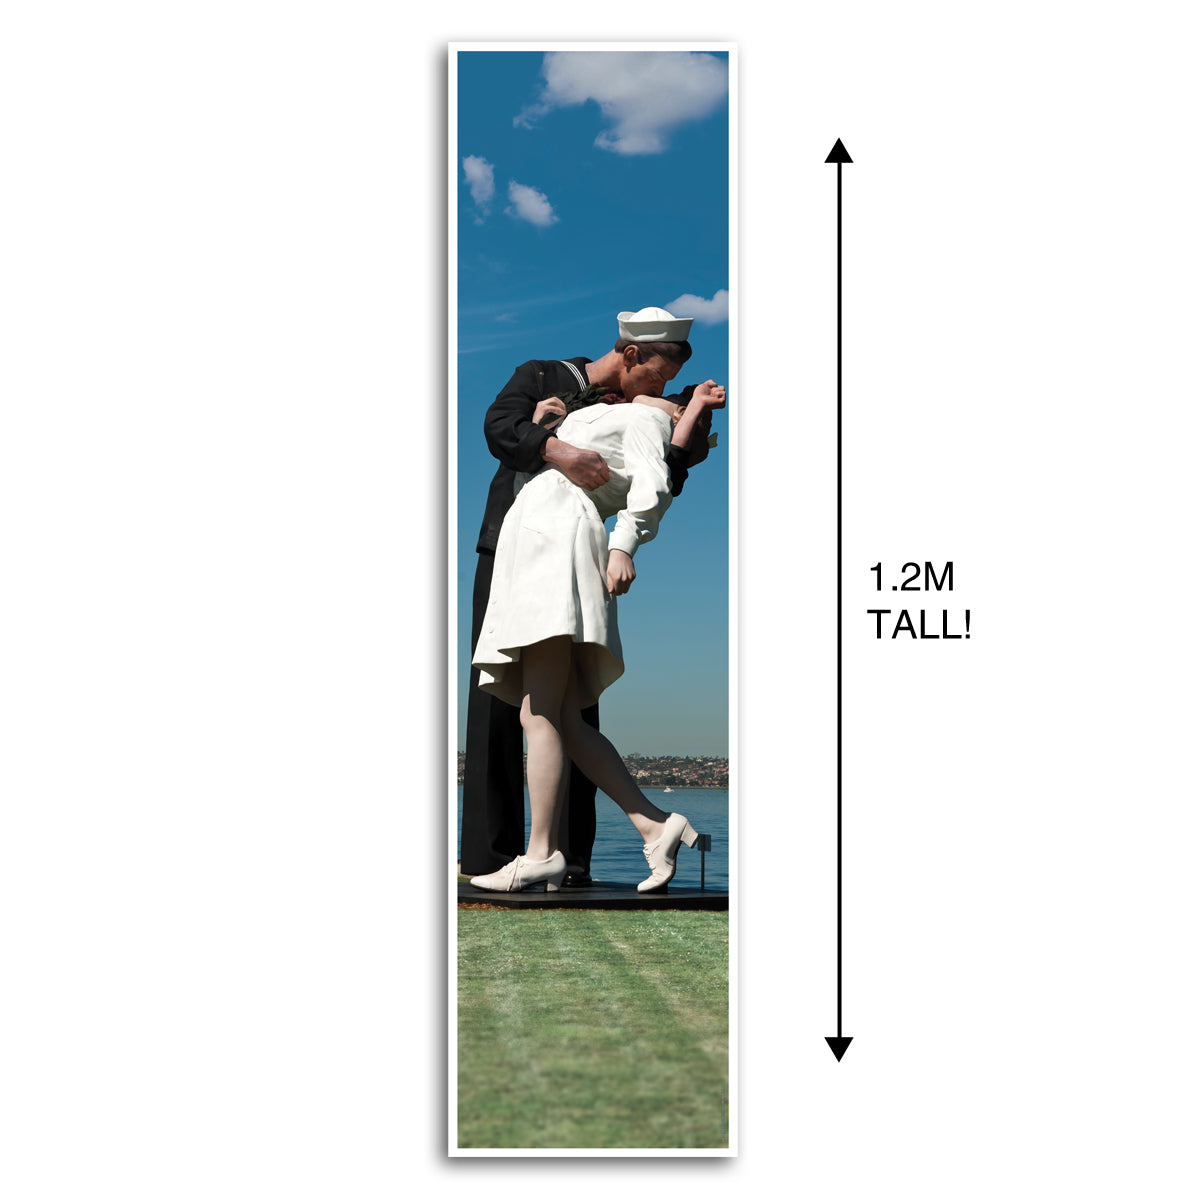 VJ Day Kissing Sailor Times Square Portrait Wall & Door Banner Decoration - 1.2m